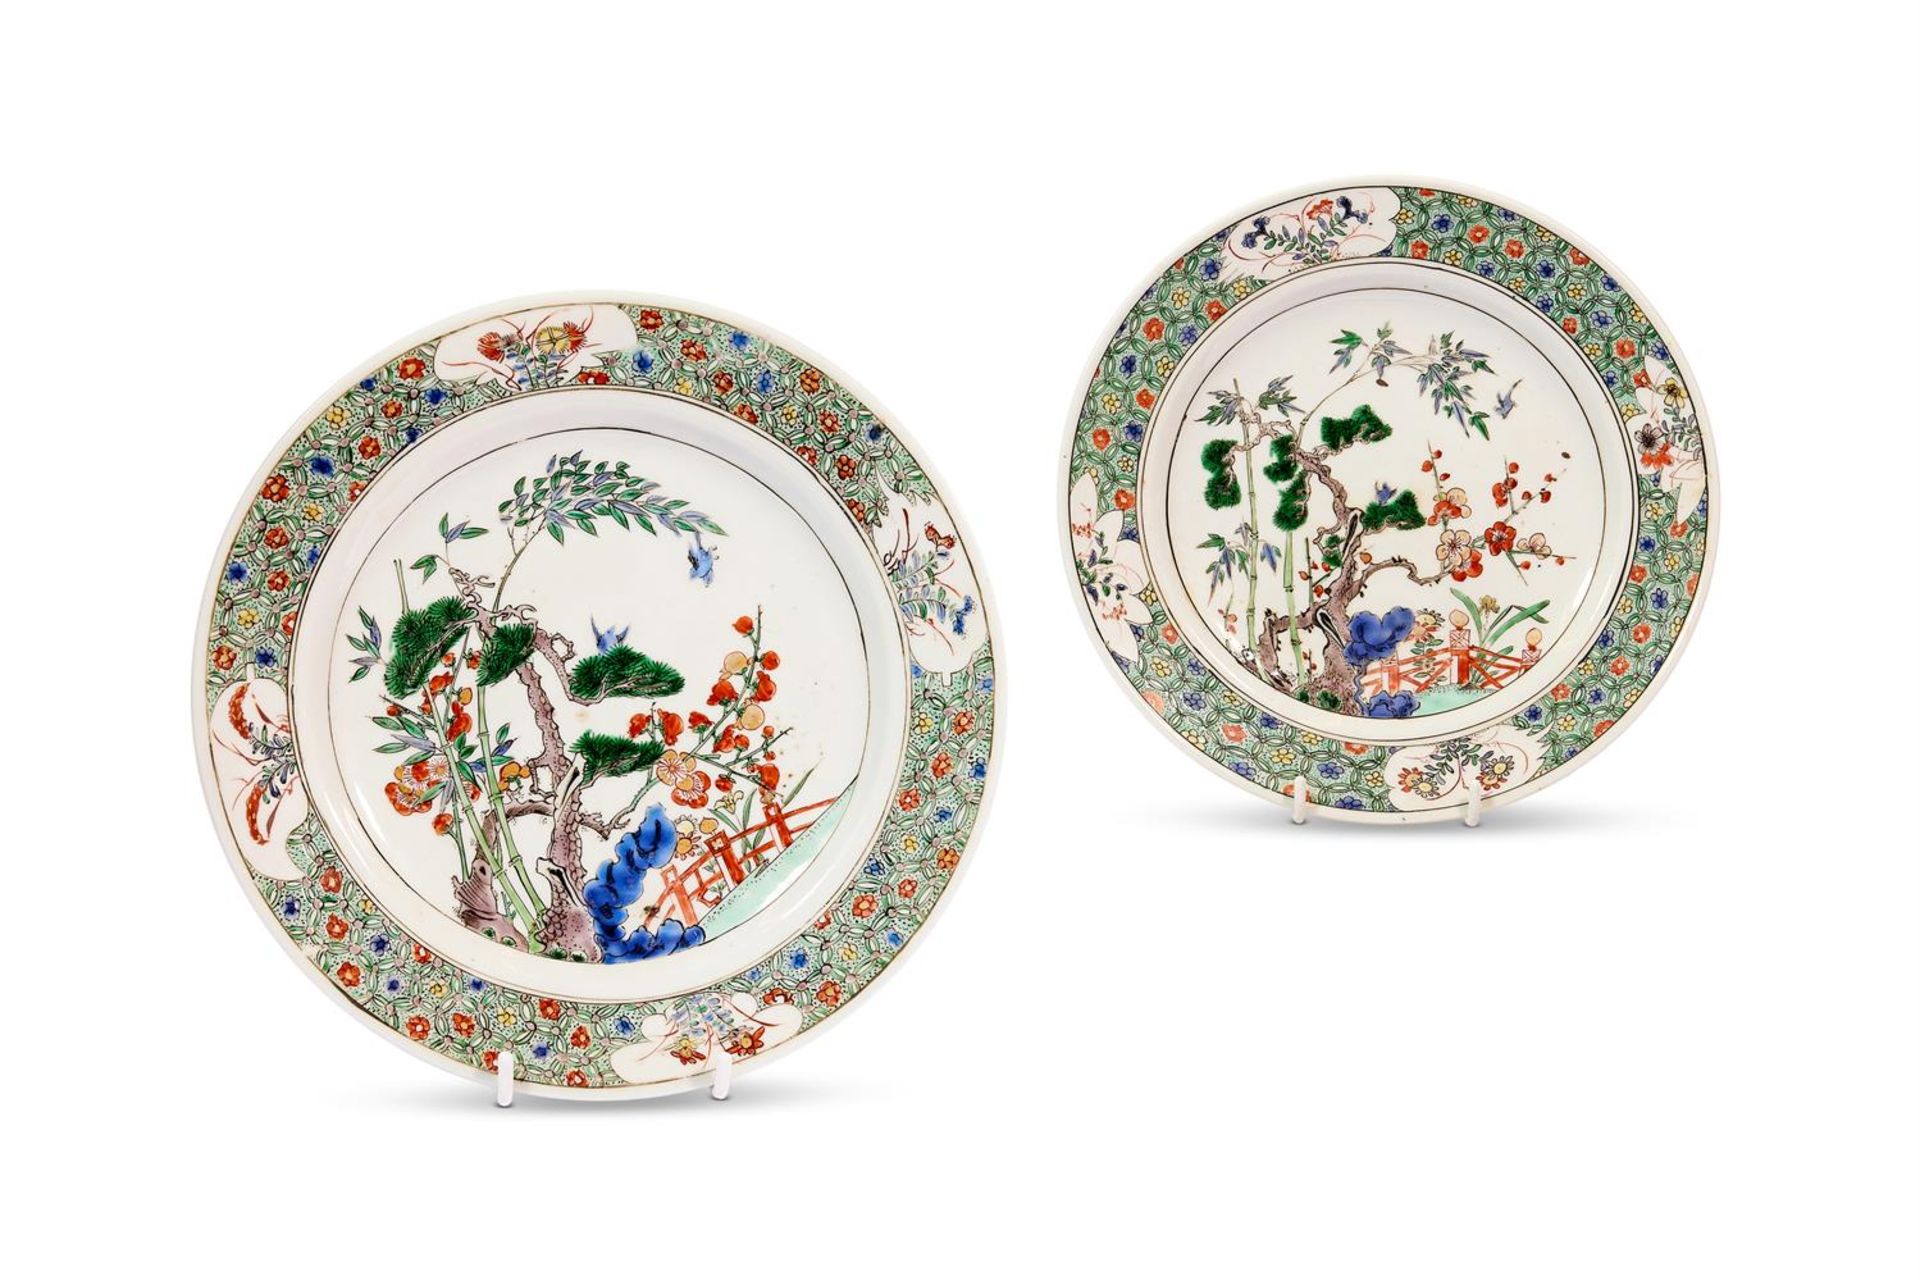 A PAIR OF CHINESE FAMILLE VERTE 'THREE FRIENDS OF WINTER' PLATES, QING DYNASTY